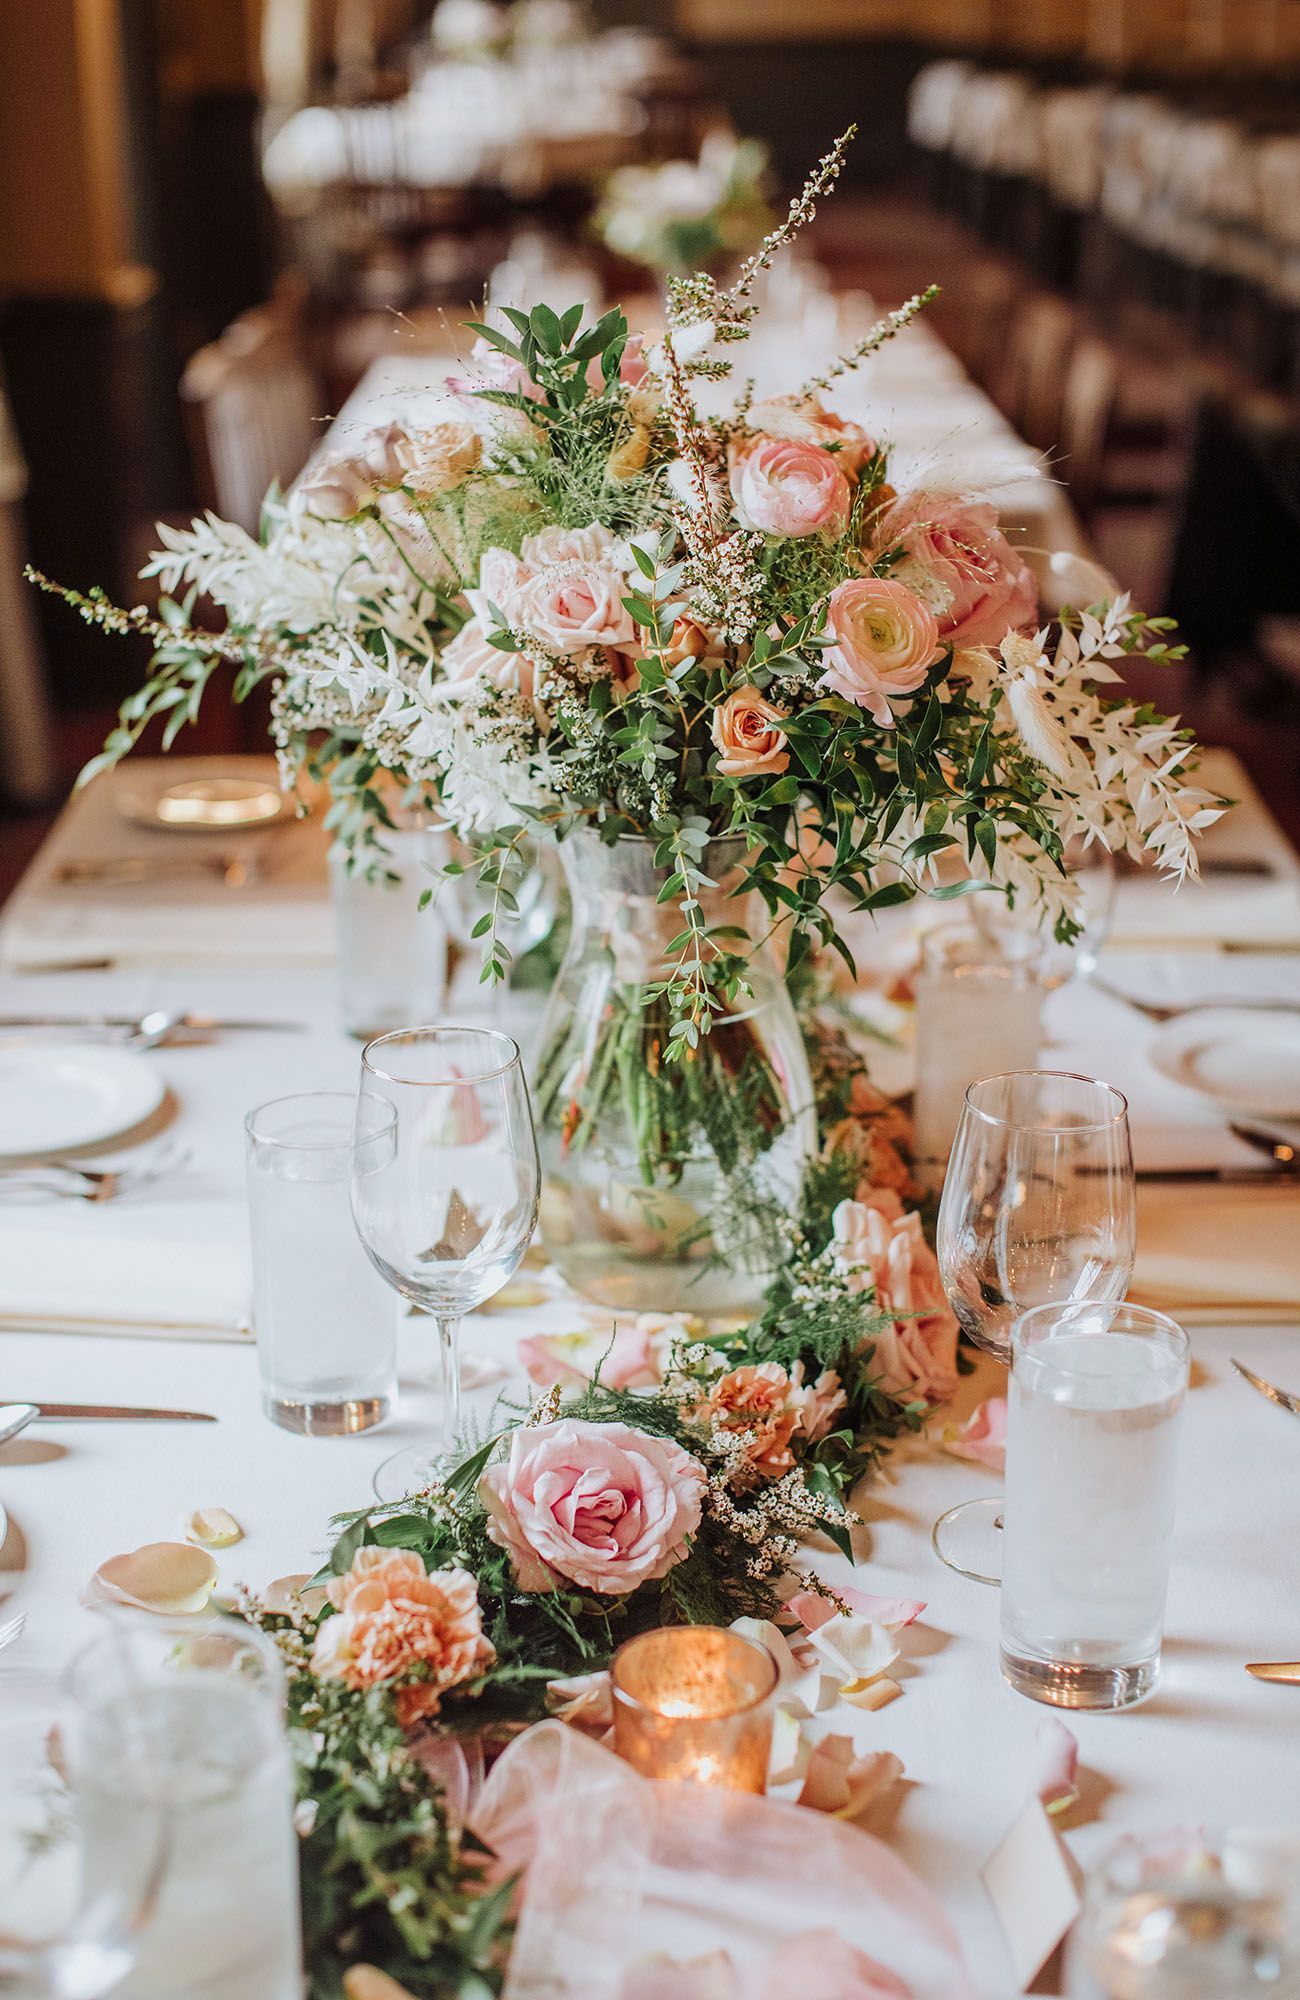 A long table with a vase of flowers on it.